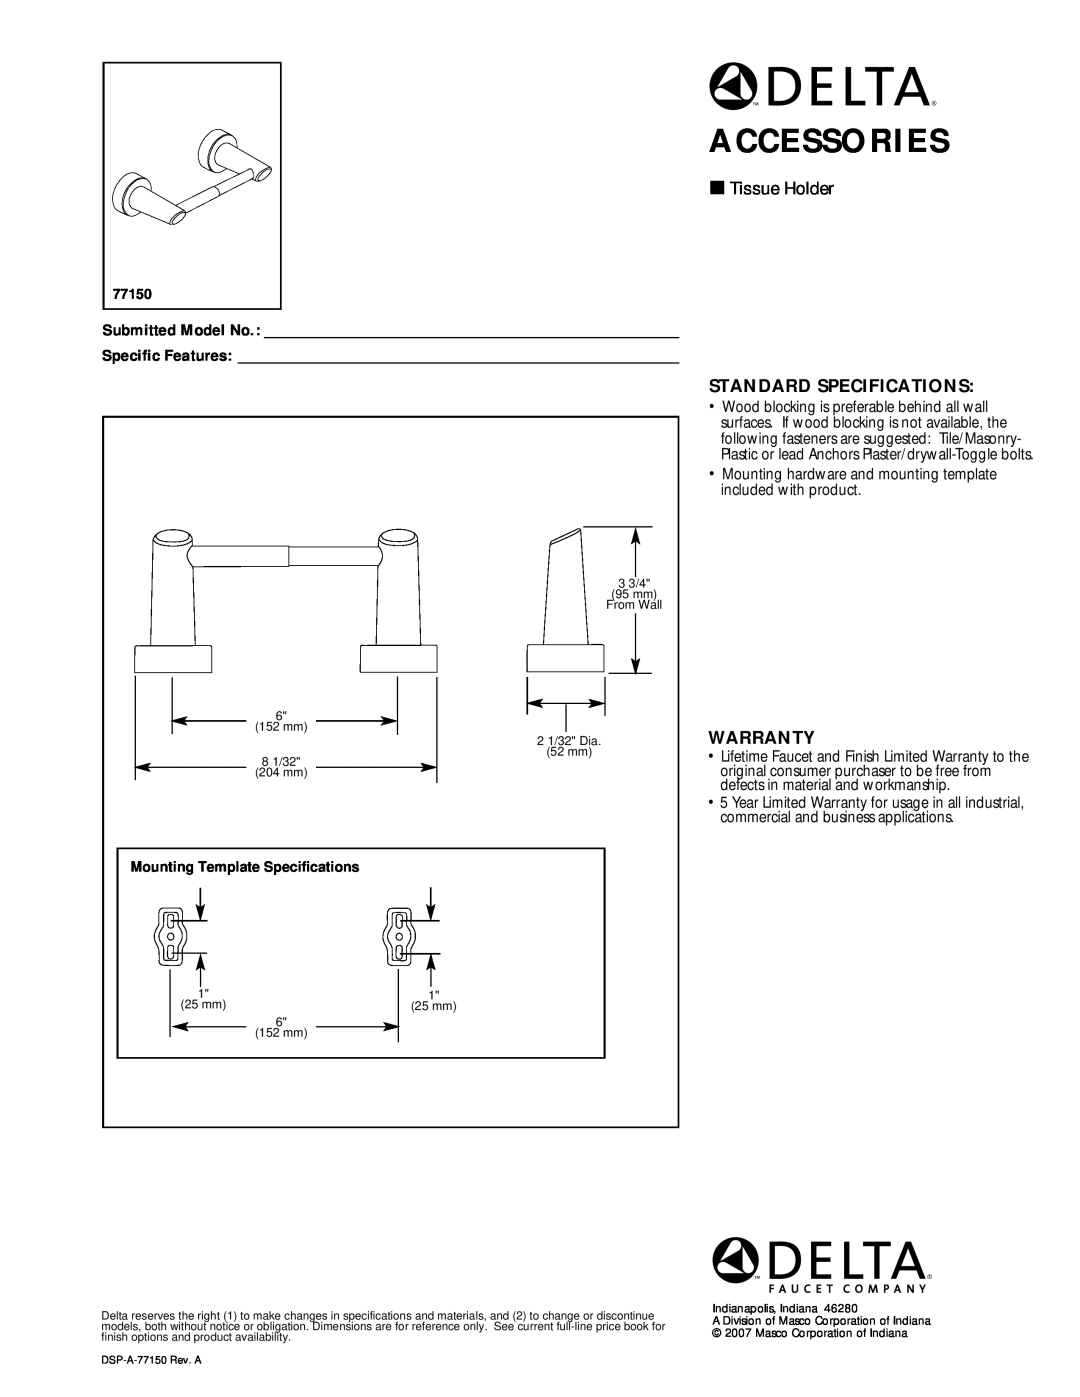 Delta 77150 specifications Accessories, Tissue Holder, Standard Specifications, Warranty, Mounting Template Specifications 